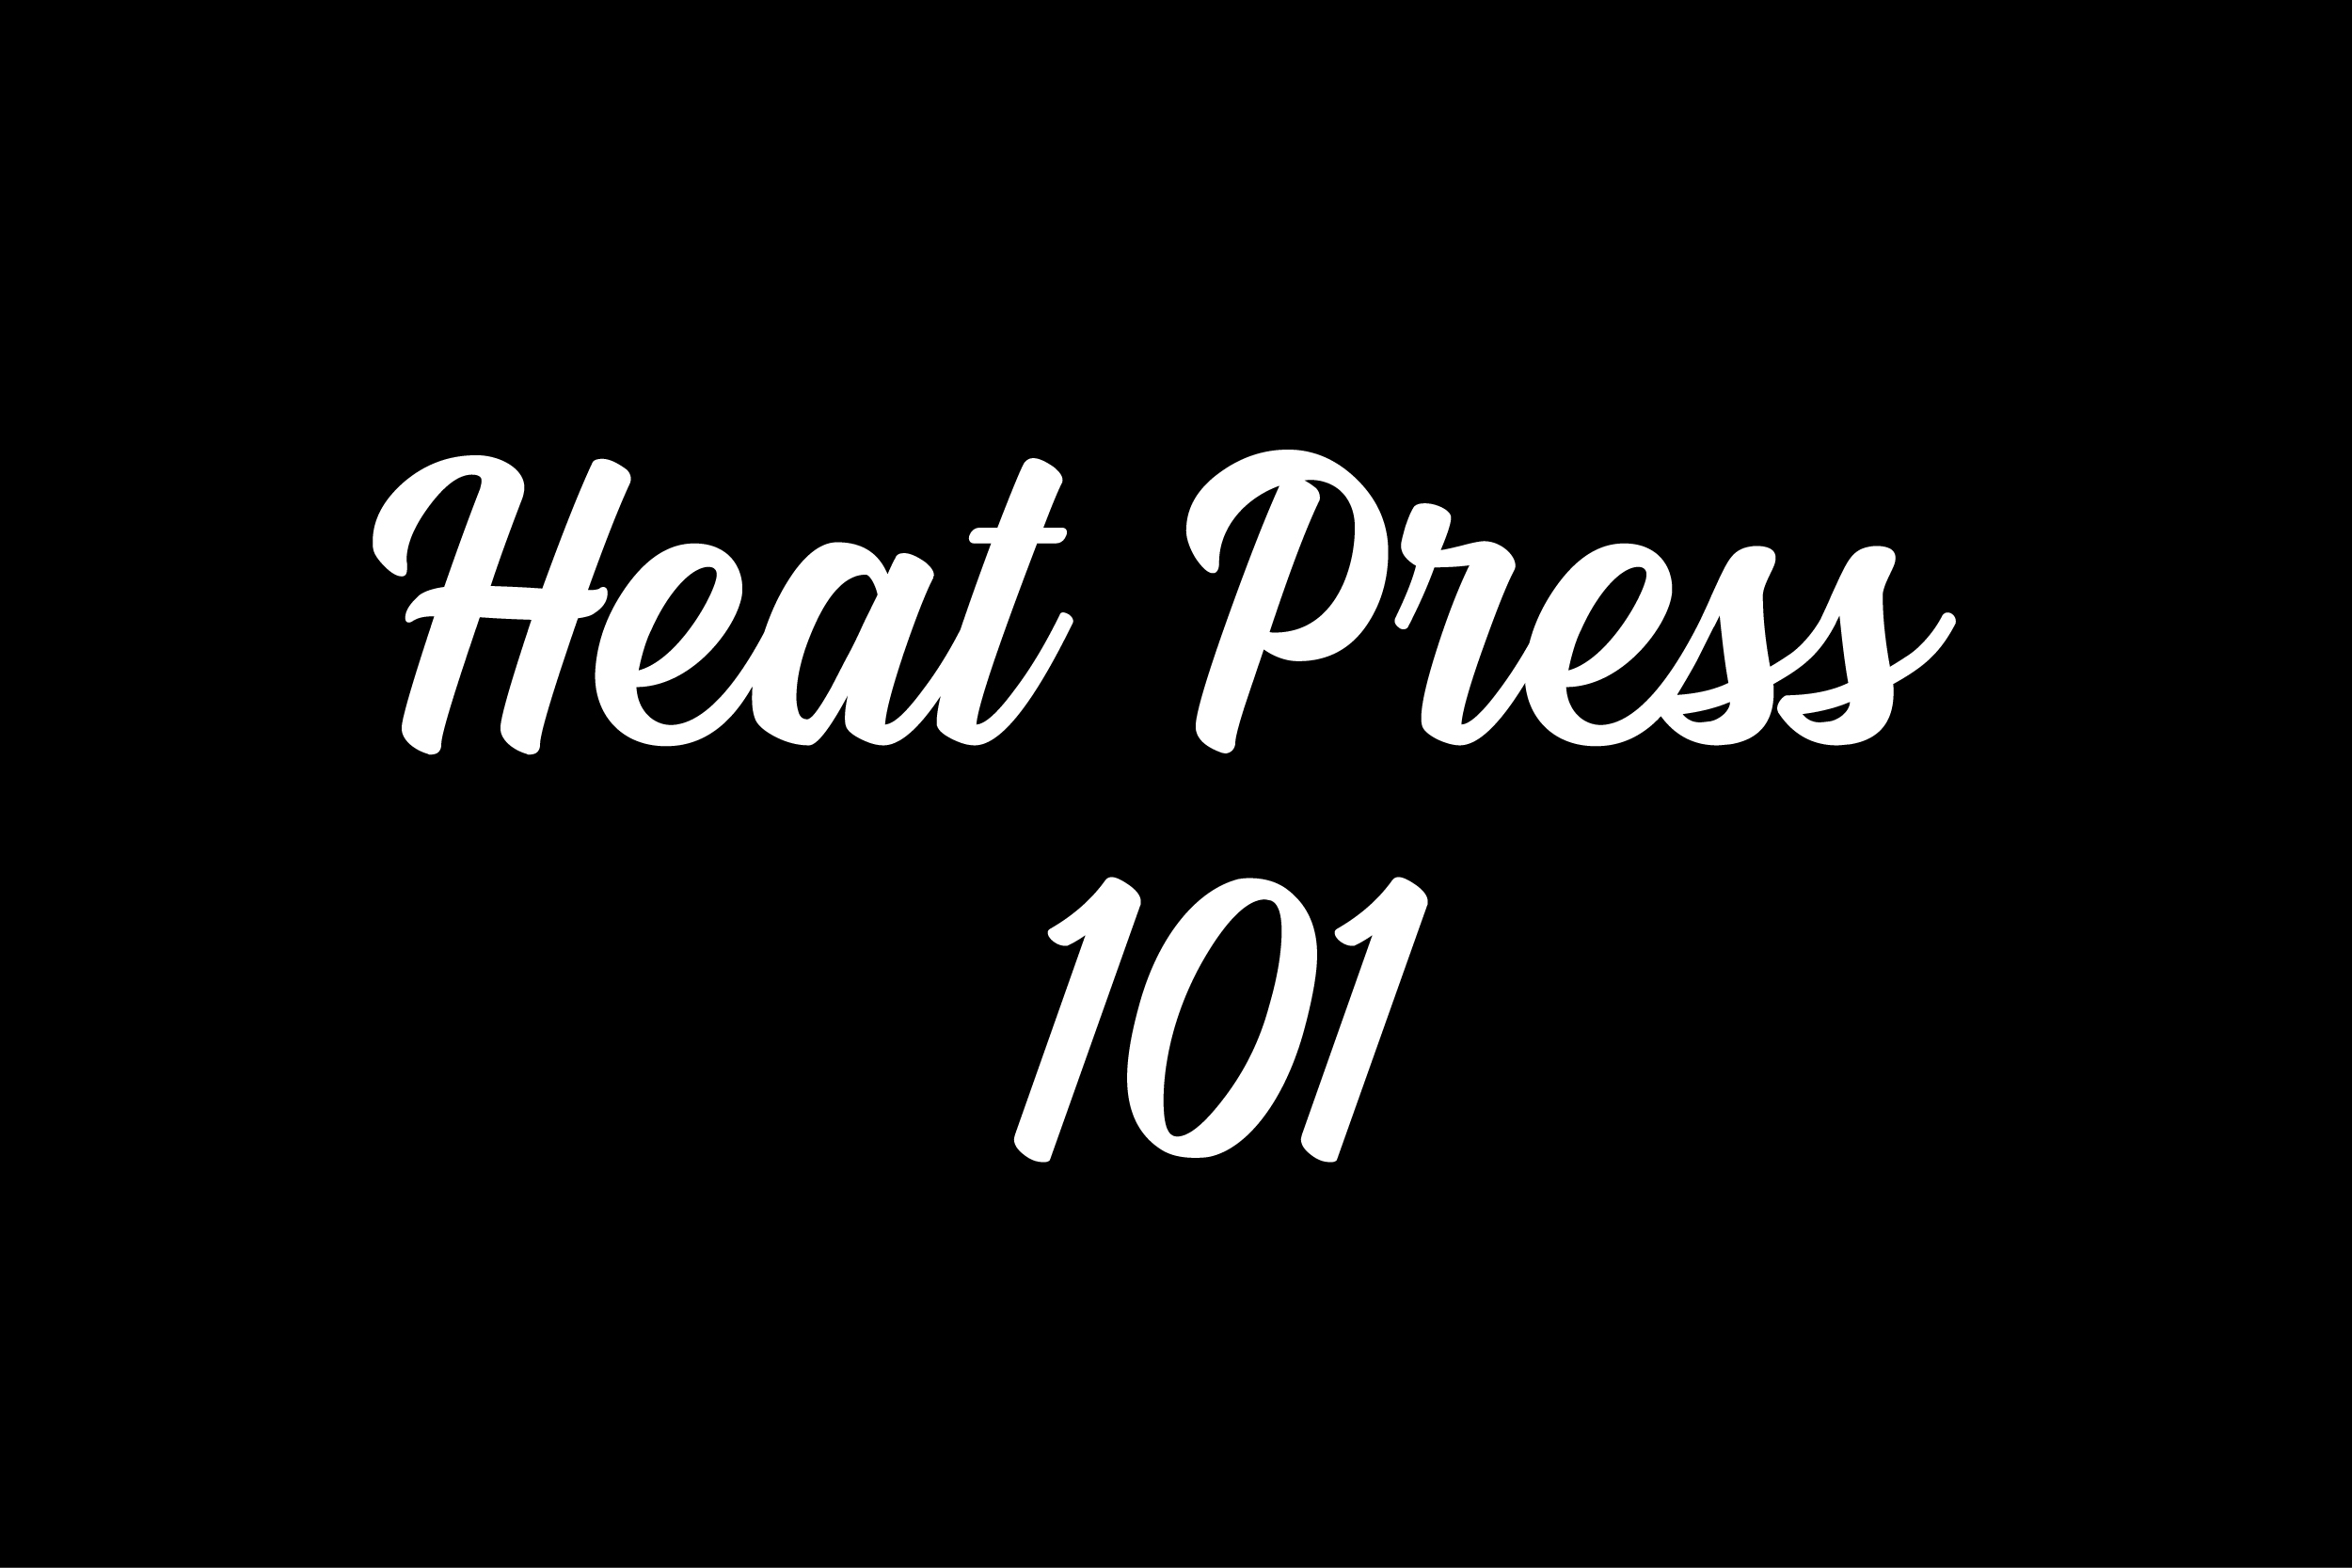 Essential Tools & Supplies 101: A Guide To HeatPressNation's Pressing